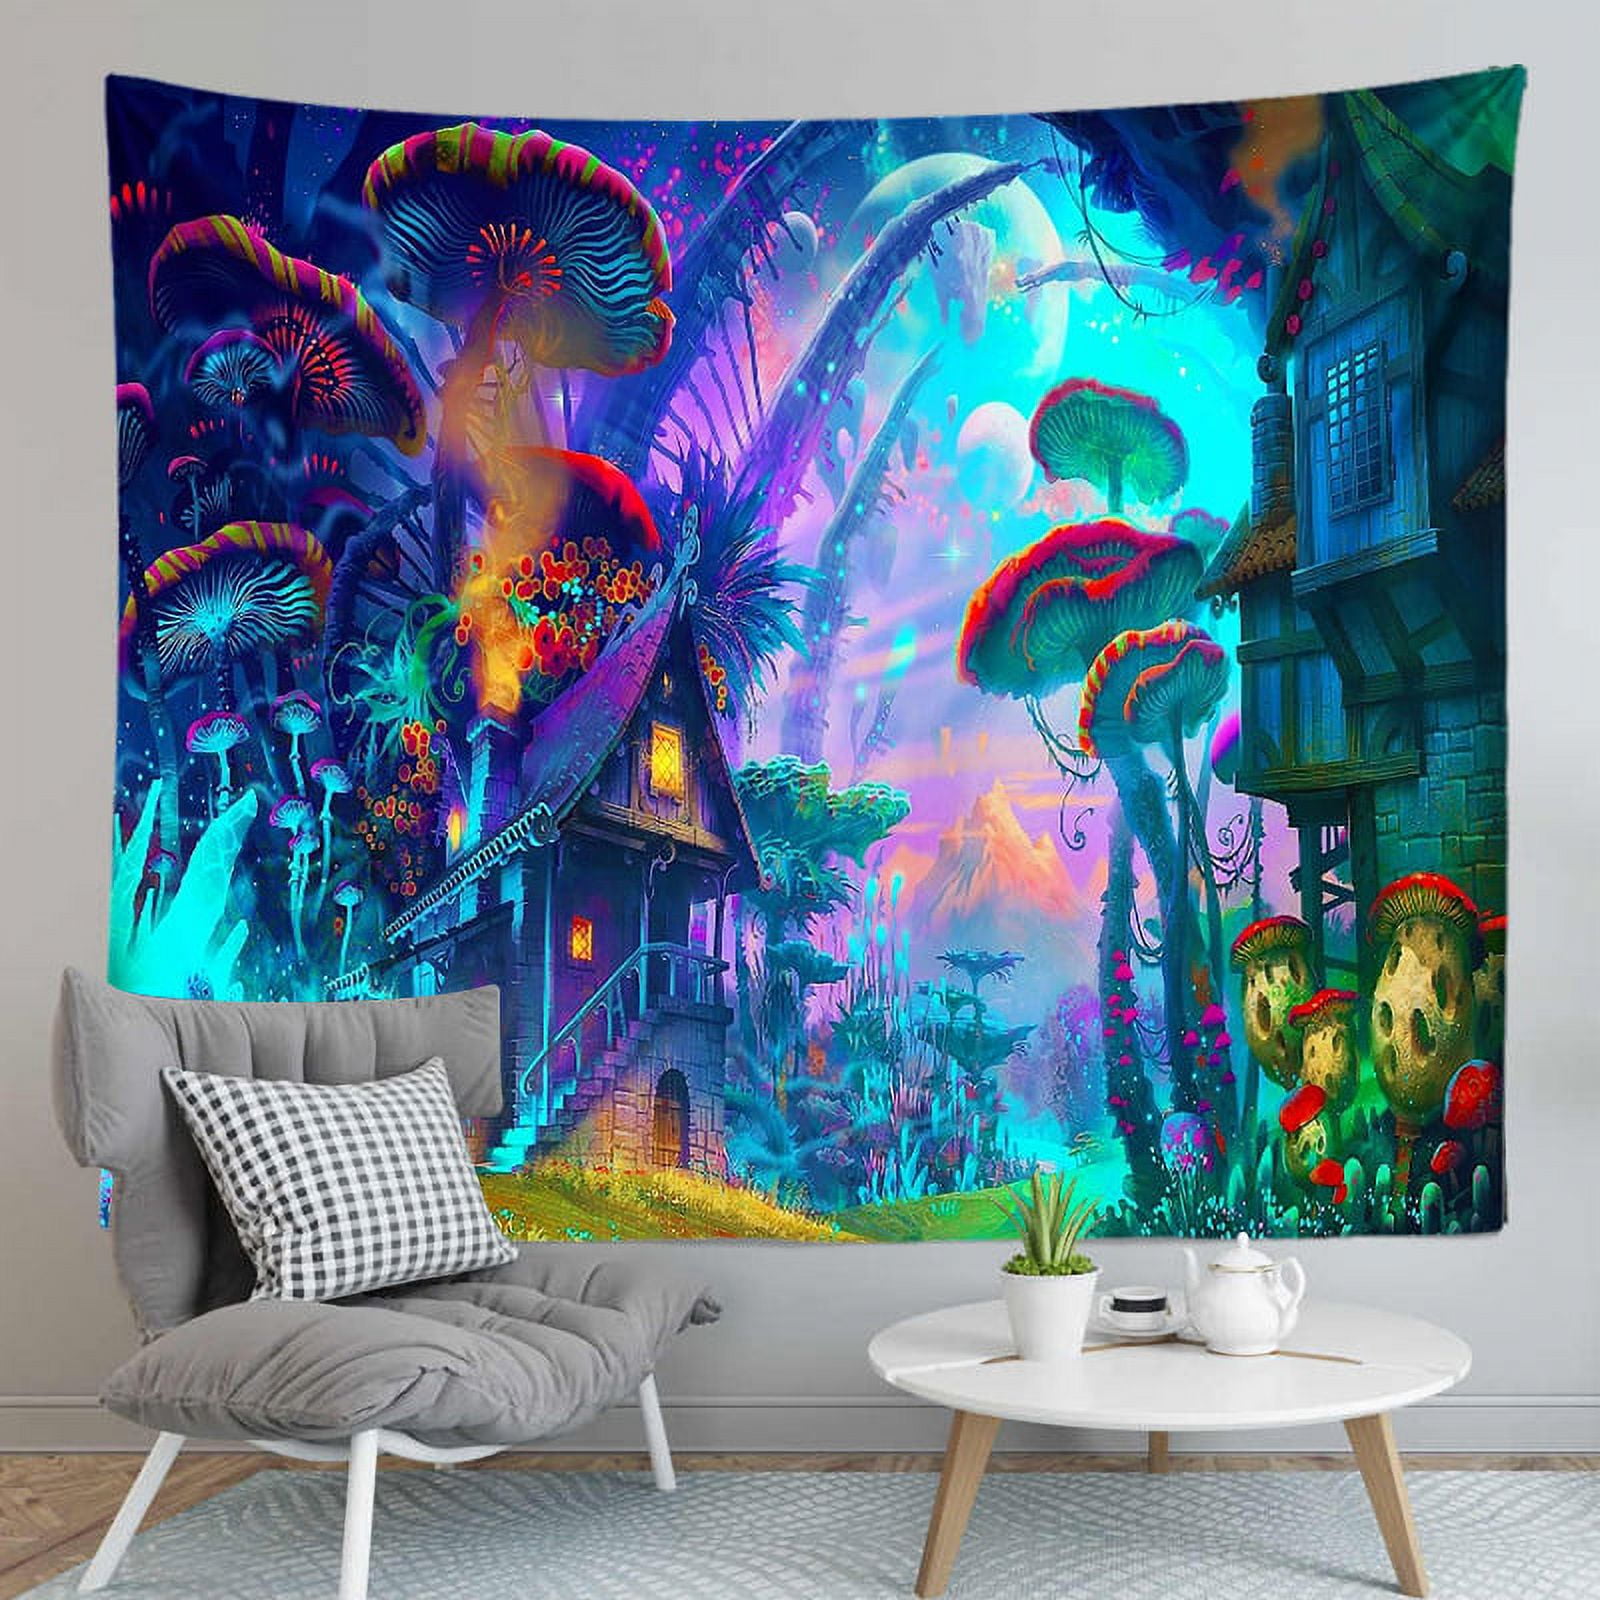  Shrahala Night Tapestry, Las Vegas Nevada Skyline Wall Hanging  Large Tapestry Psychedelic Tapestry Decorations Bedroom Living Room  Dorm(51.2 x 59.1 Inches, Grey) : Home & Kitchen